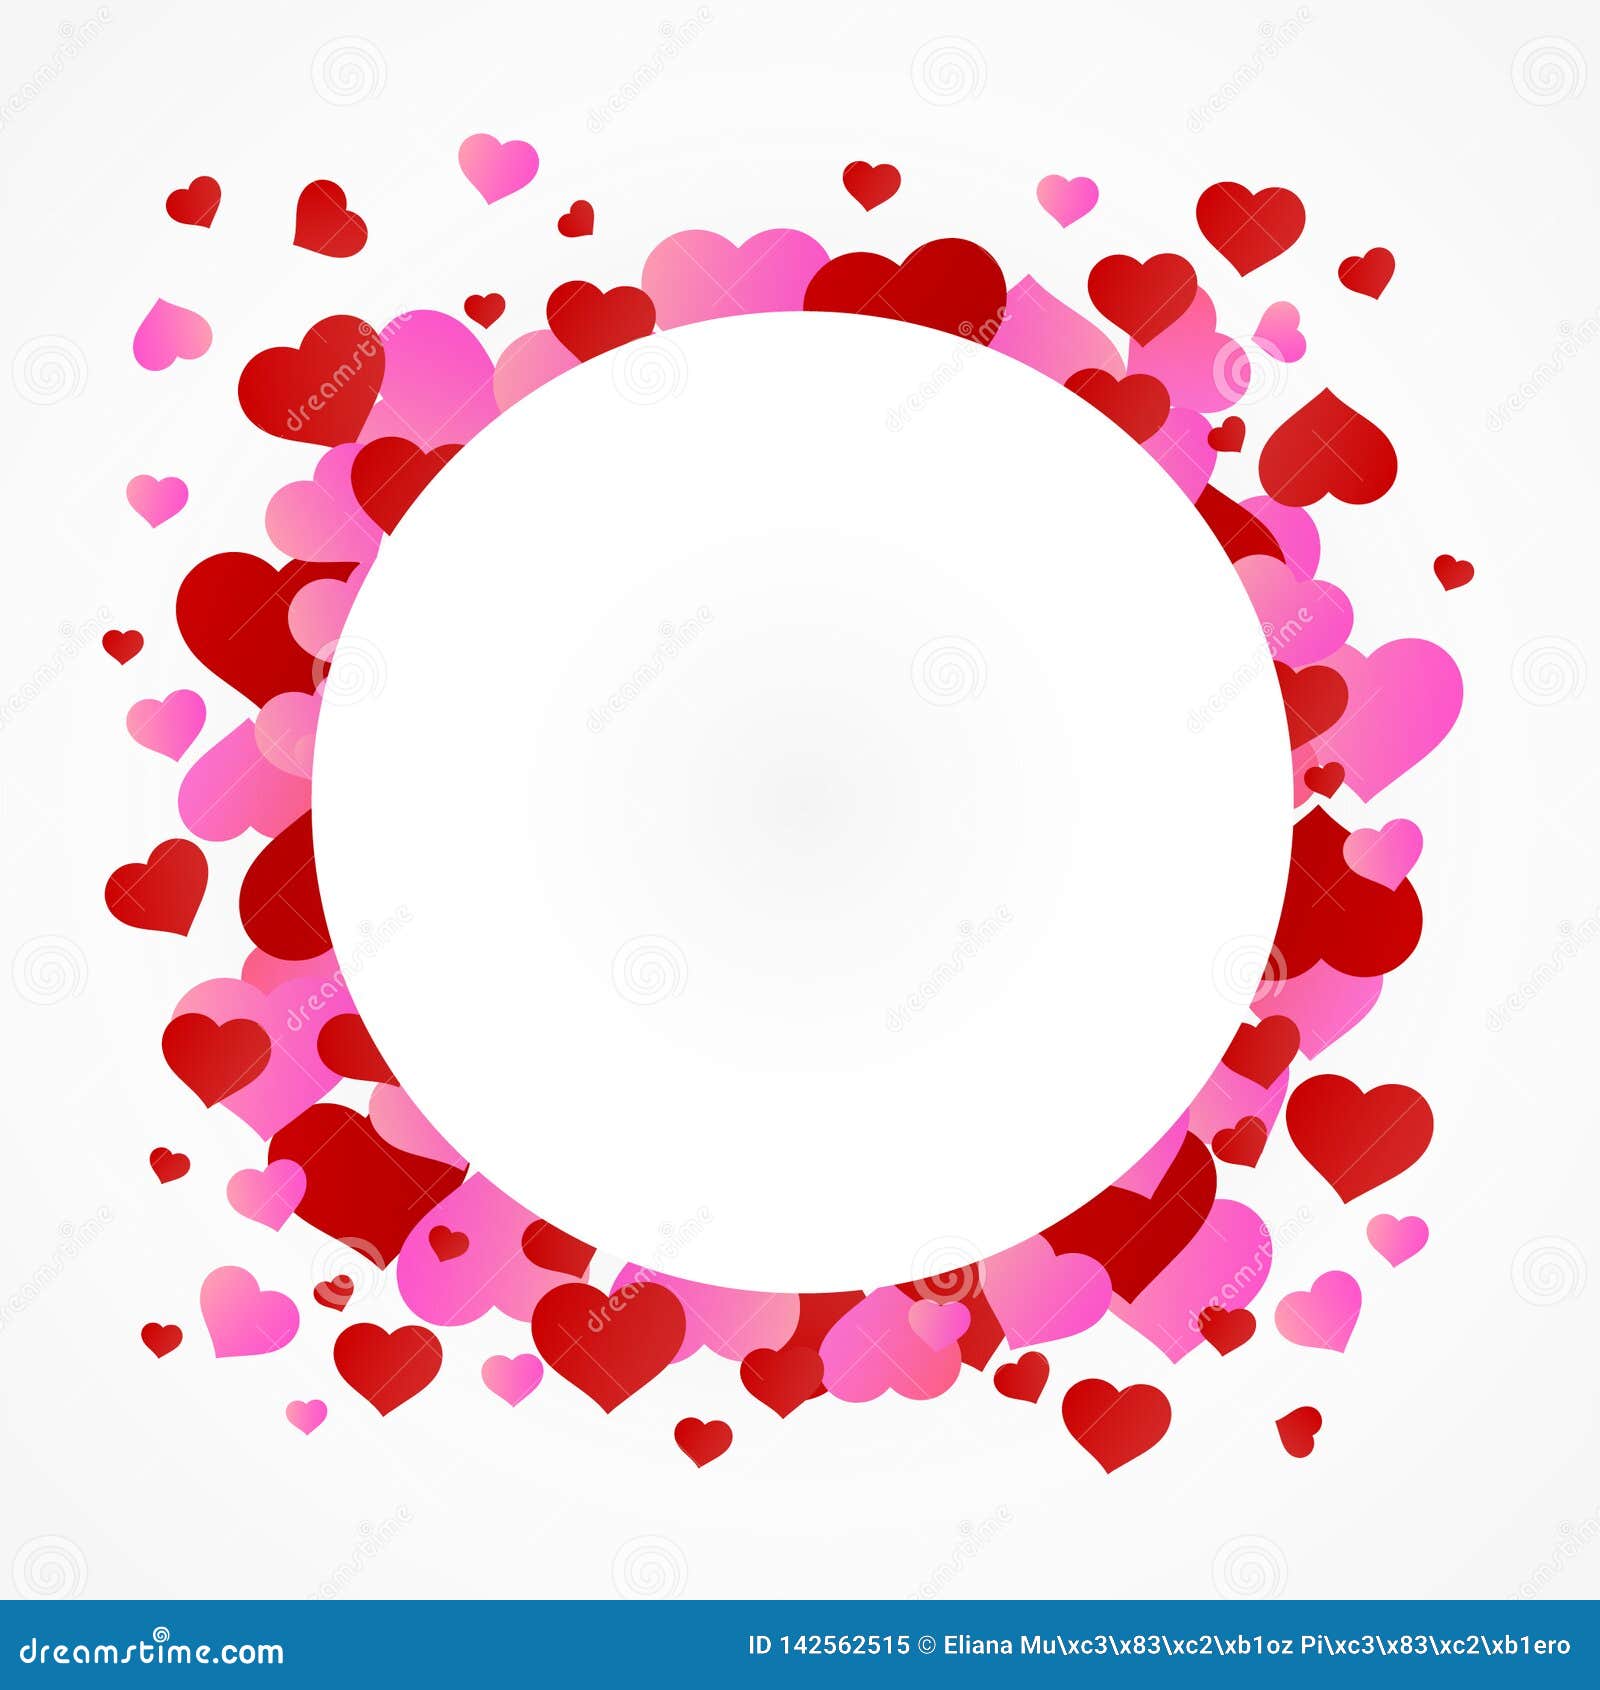 white circle on colorful hearts